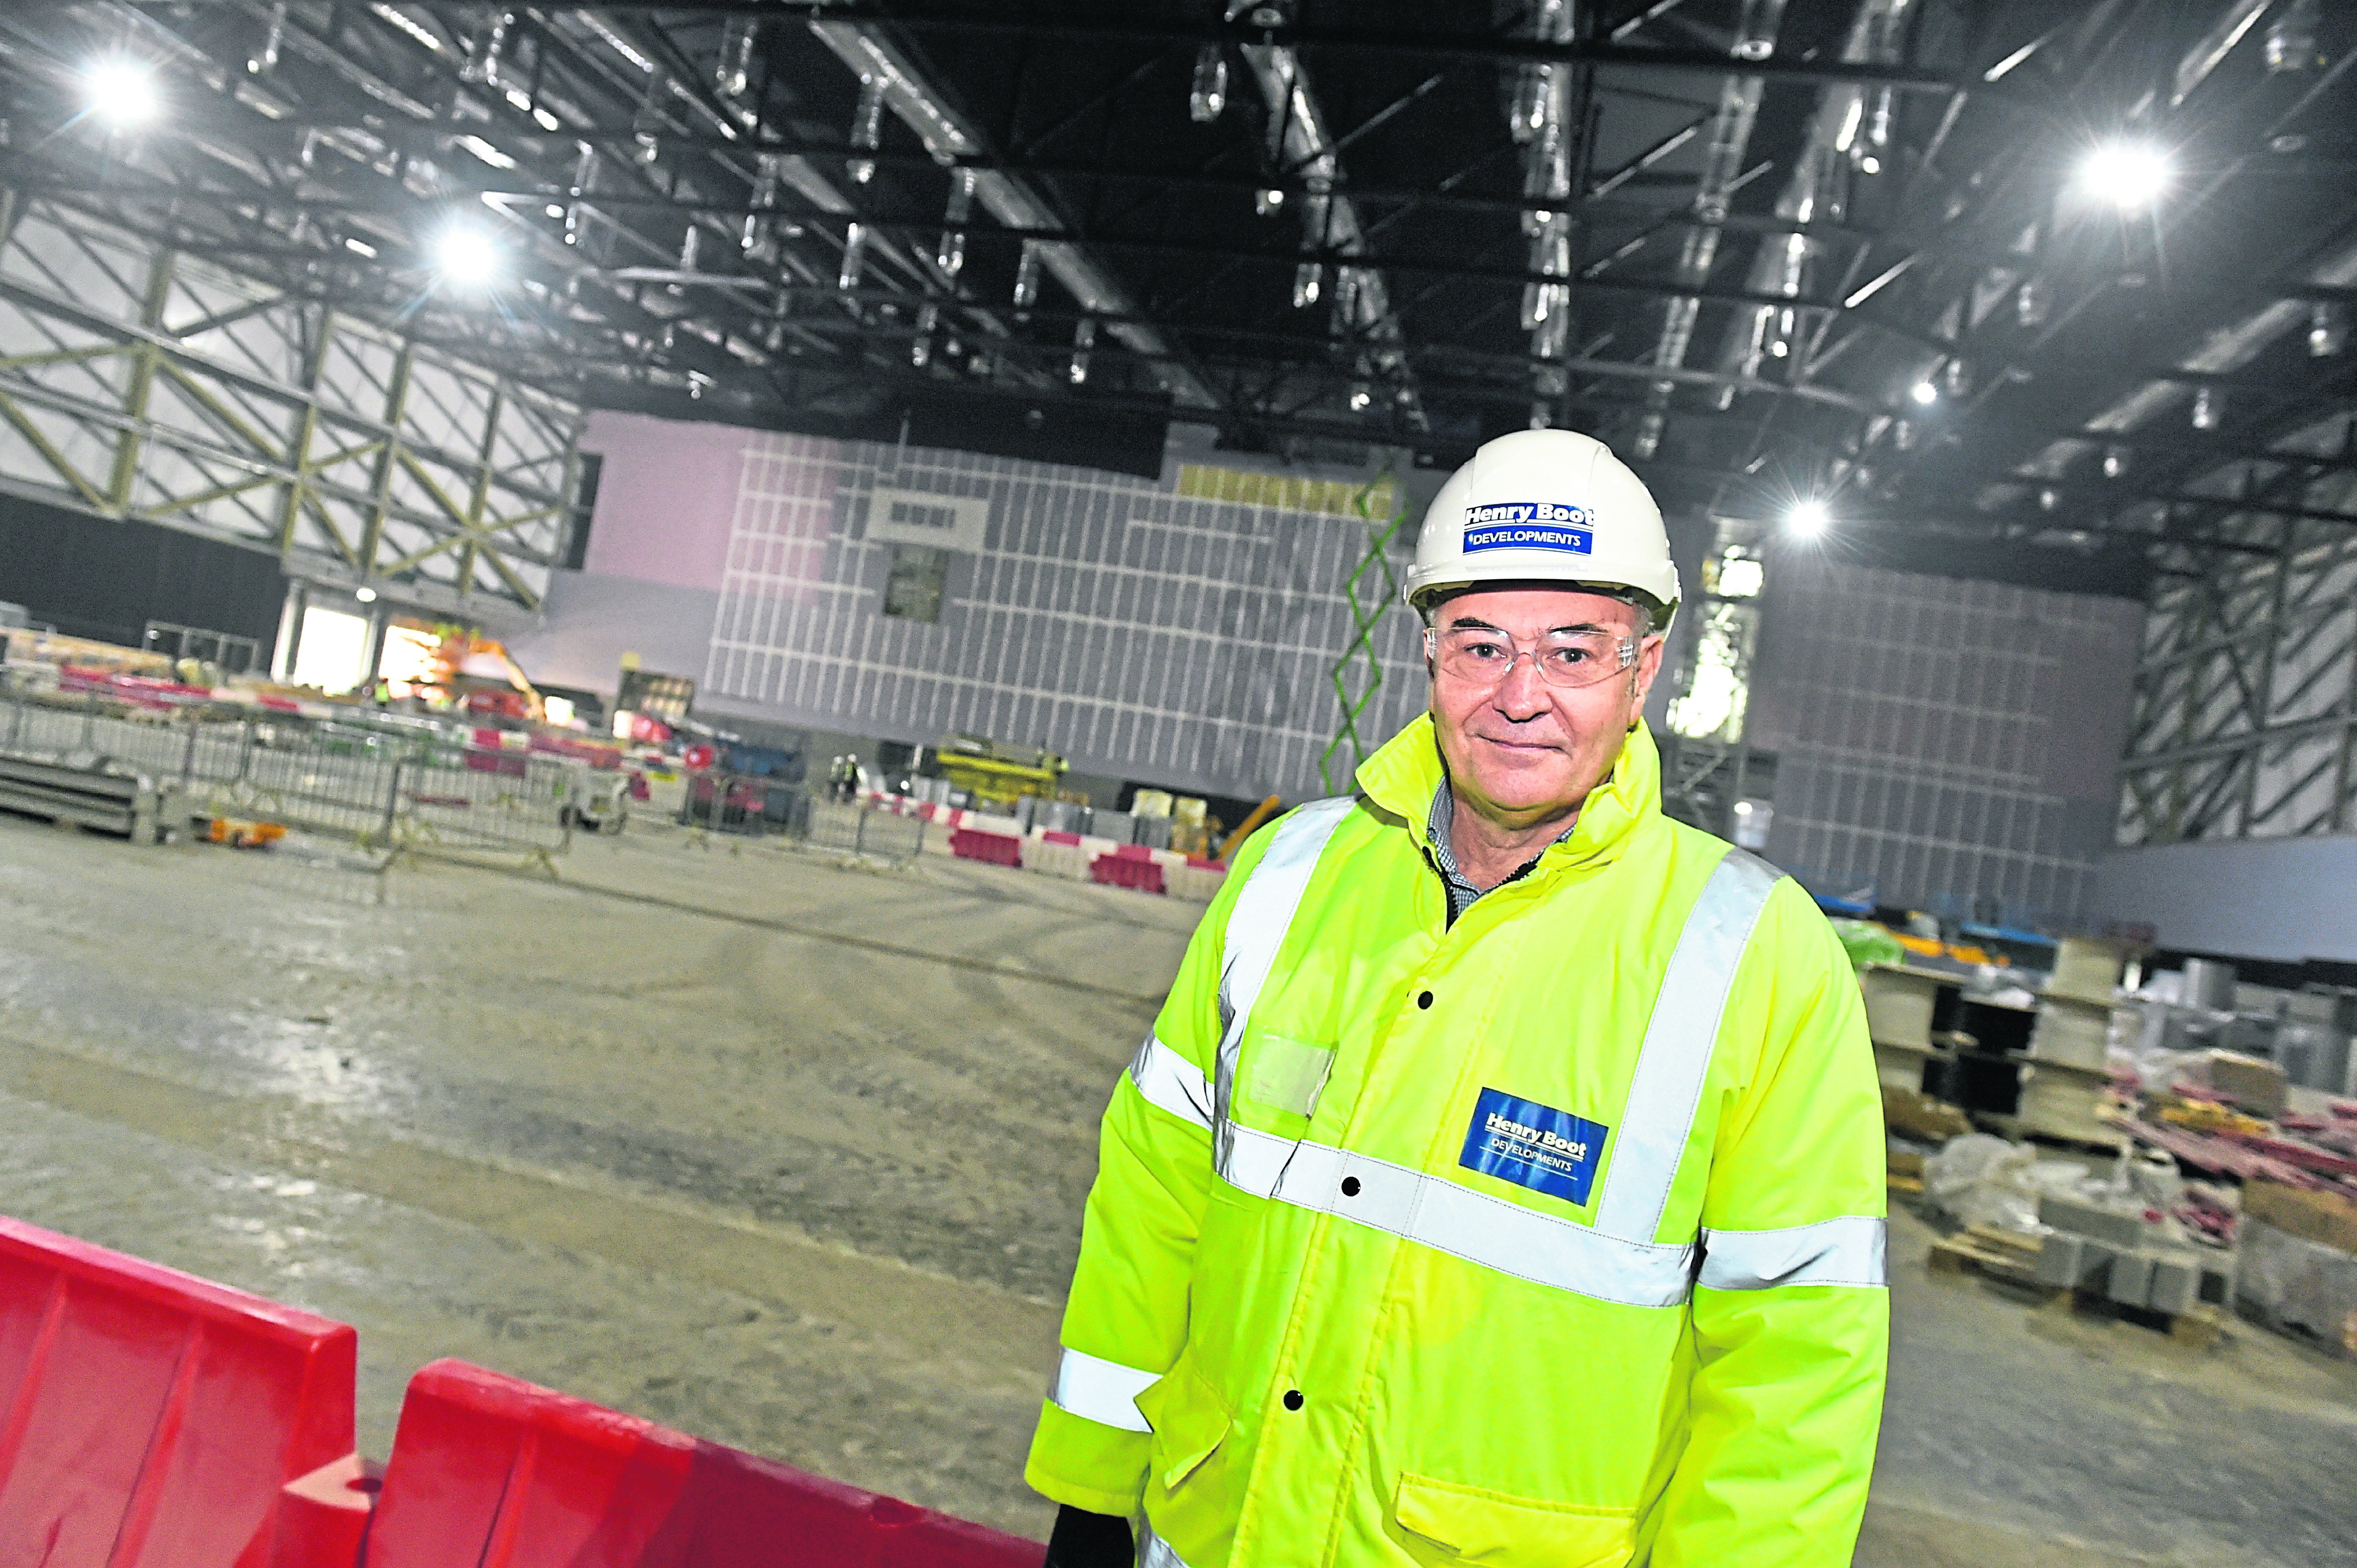 Tour of the TECA arena, the new AECC and hotels. Nigel Munro, Regional Project Manager for HBD in Scotland.